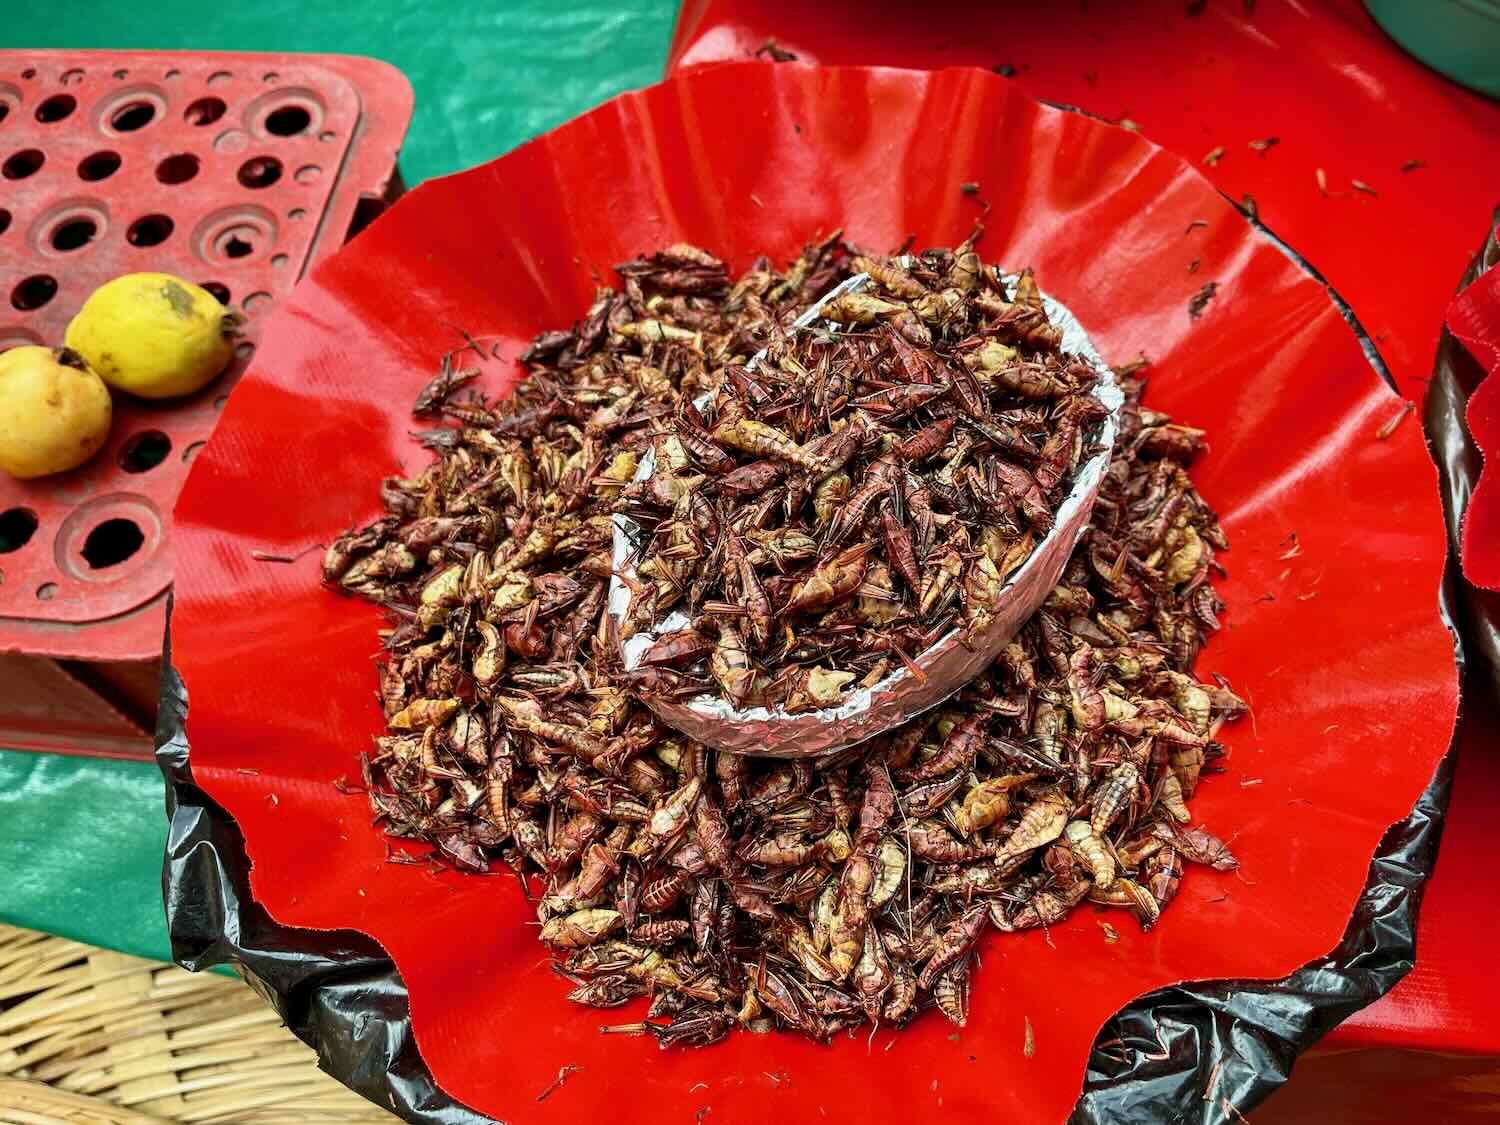 Chapulines - deep fried grasshoppers - are a Oaxacan delicacy dating back to ancient times